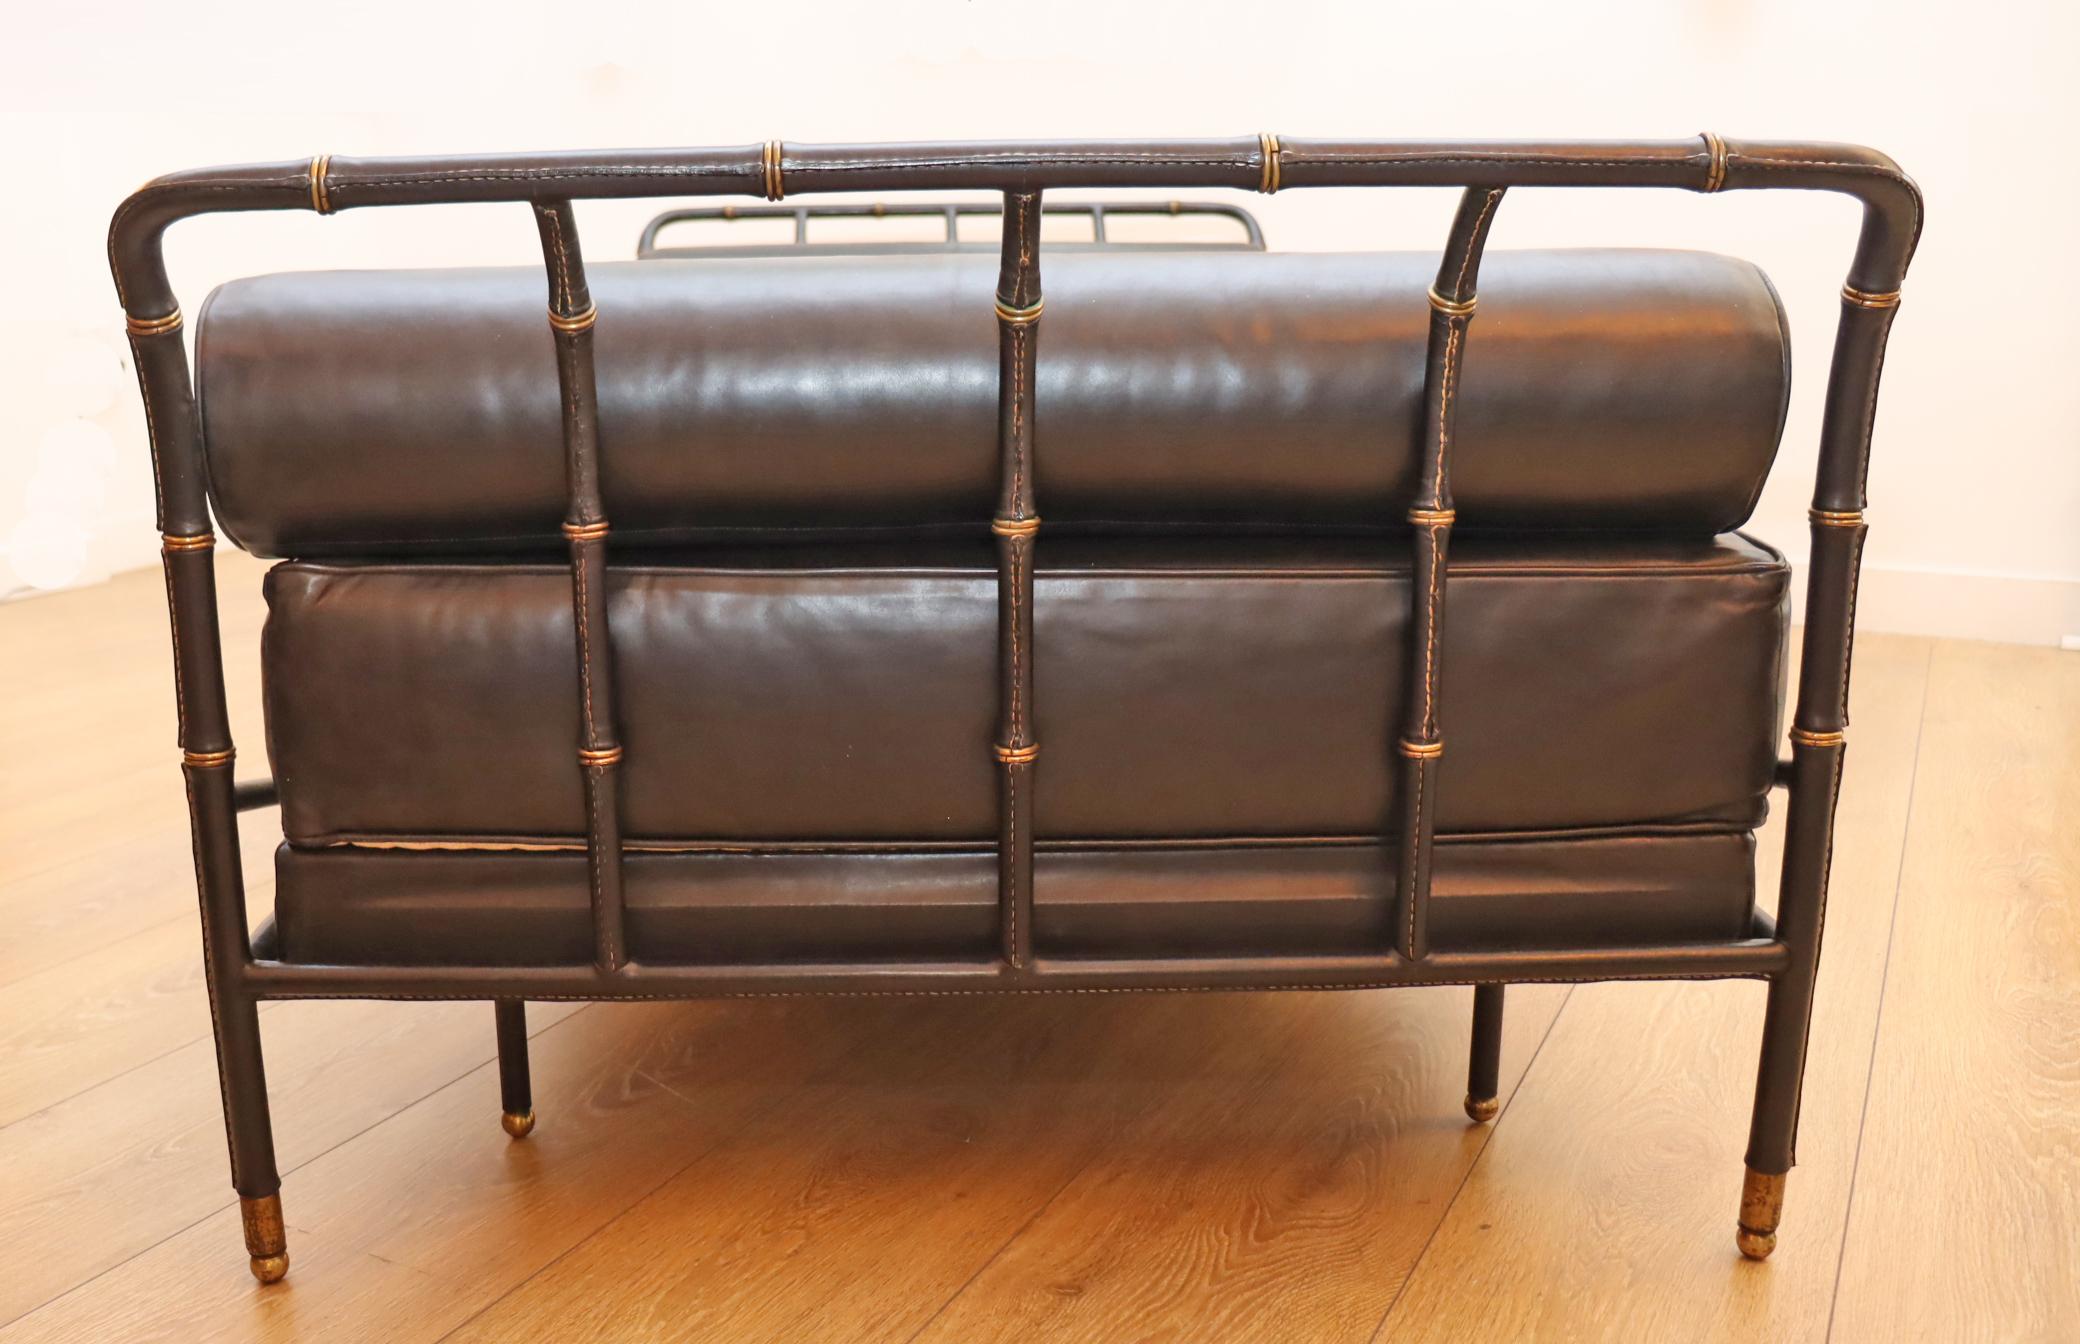 Daybed by Jacques Adnet Black Stitched Leather and Brass, France 1950 For Sale 2